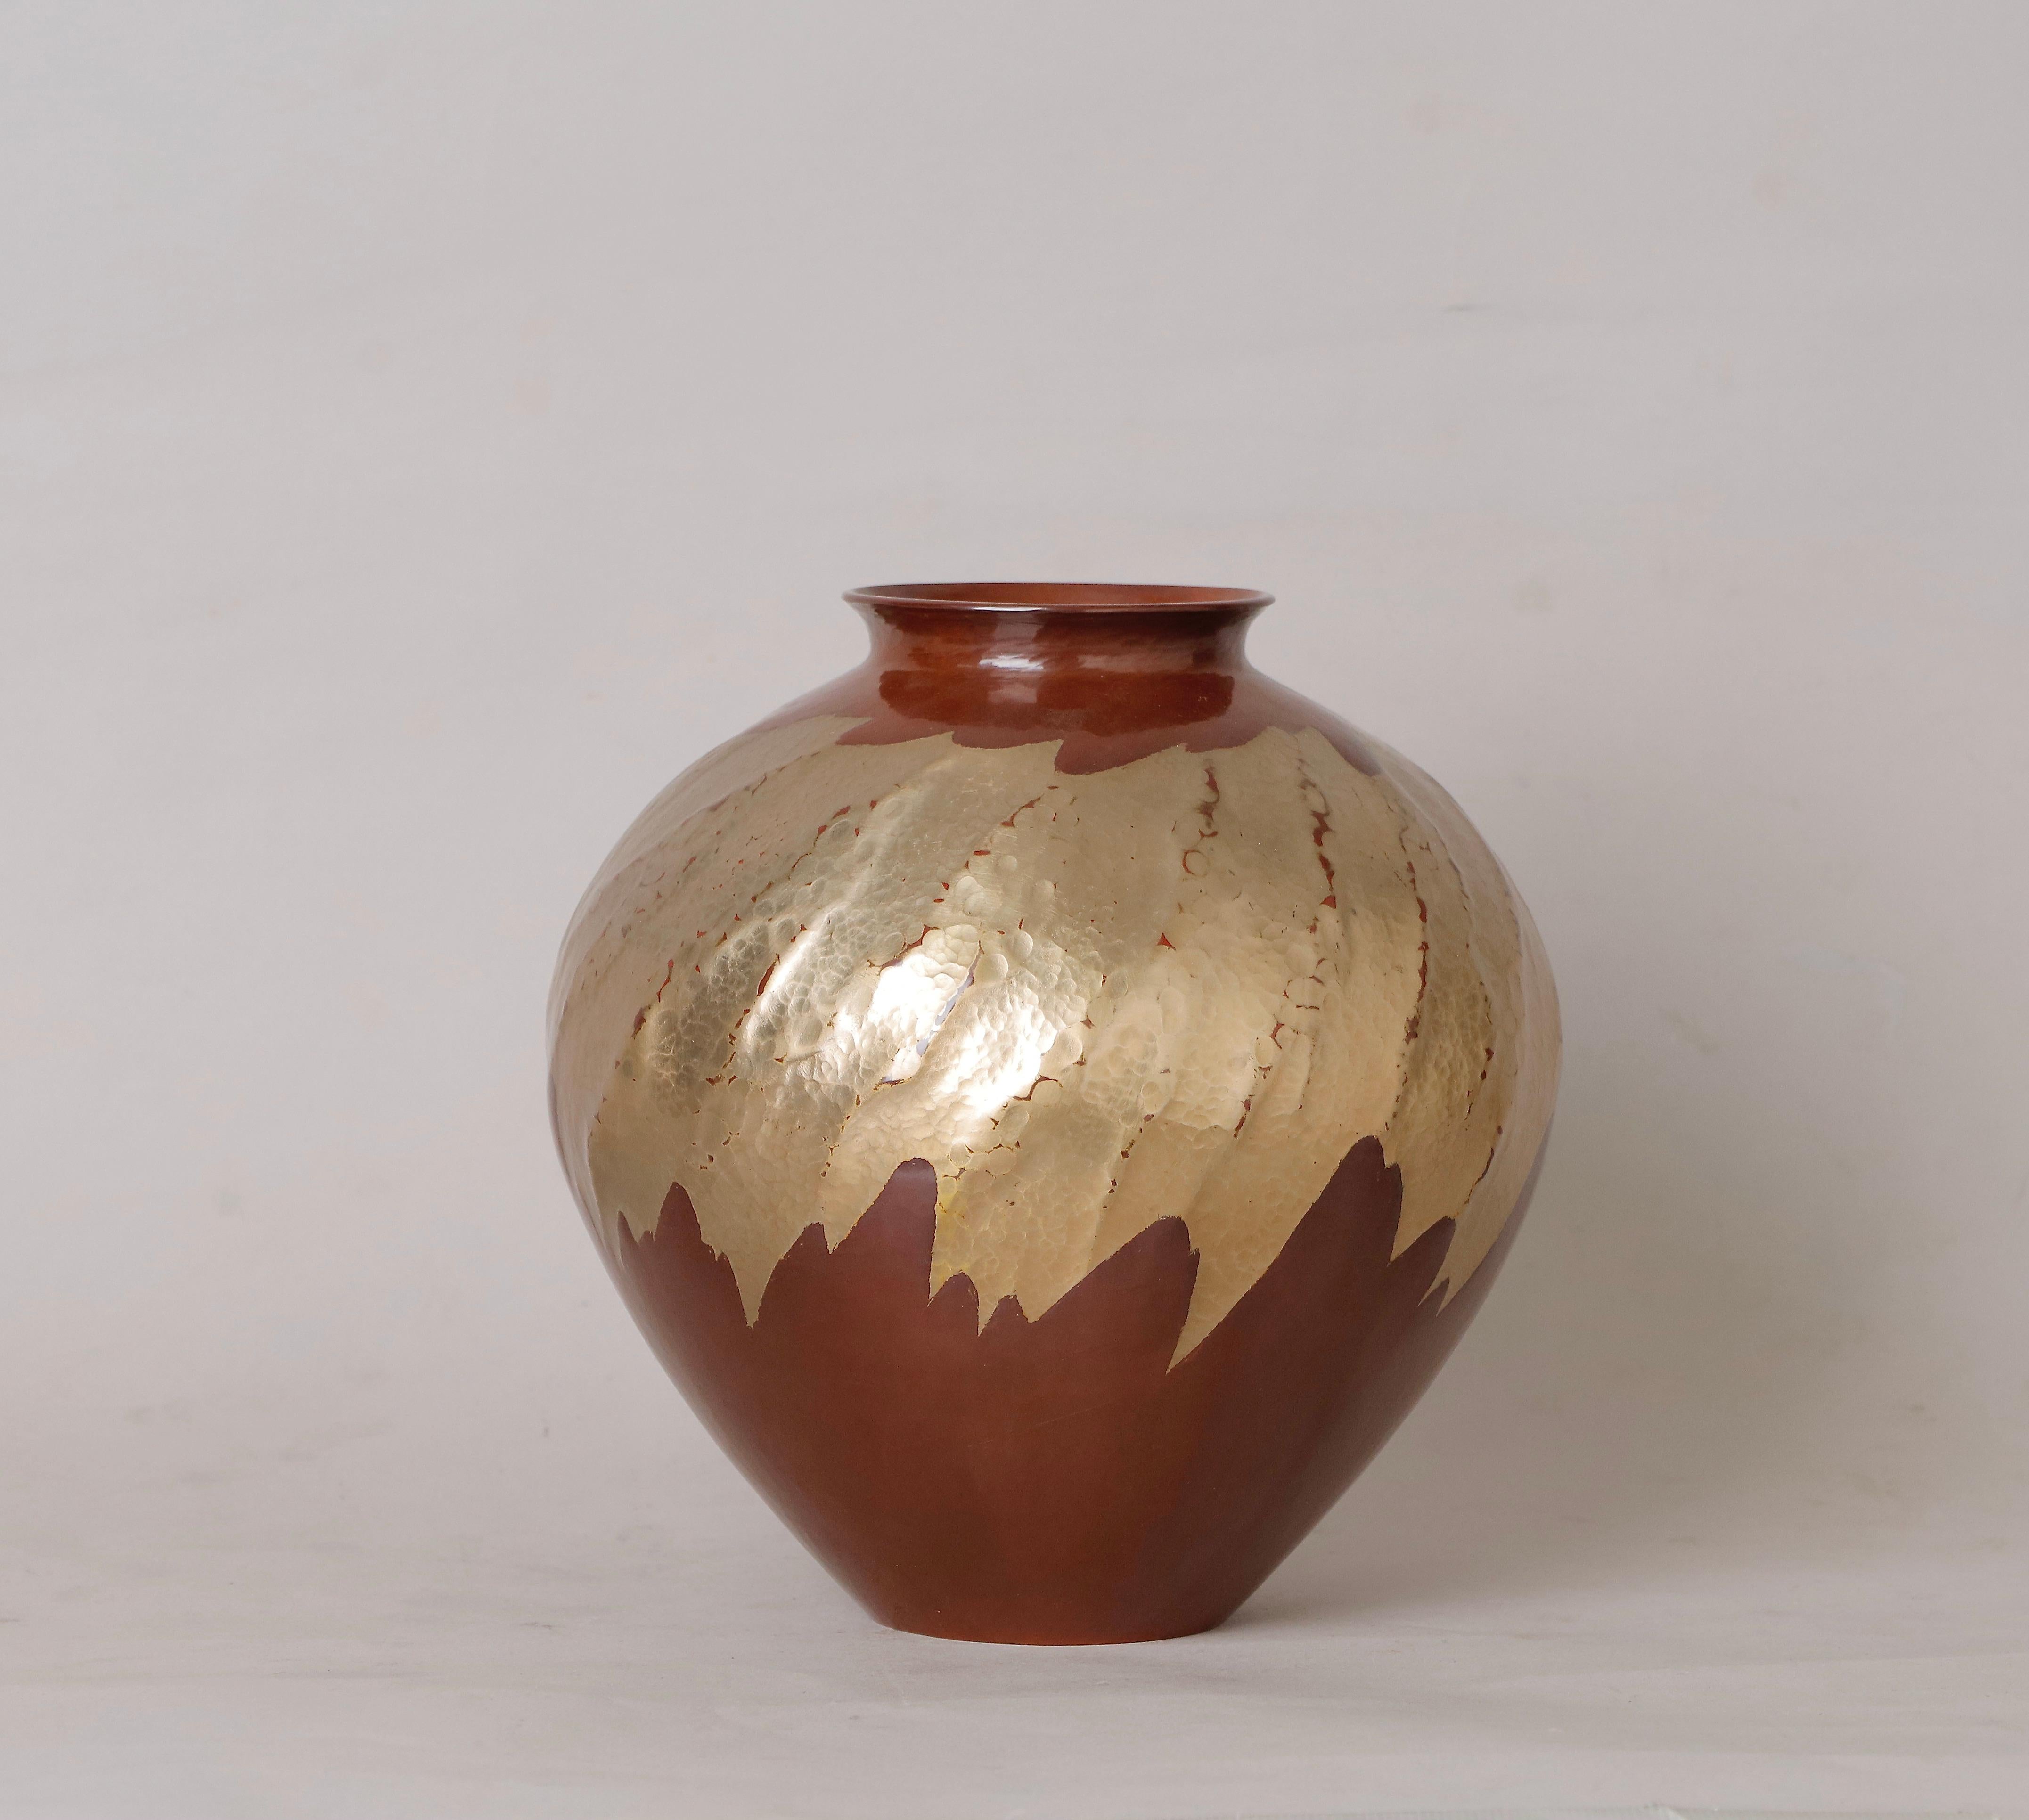 Japanese Artisanal Hand-Hammered Copper Vase by Renowned Gyokusendo